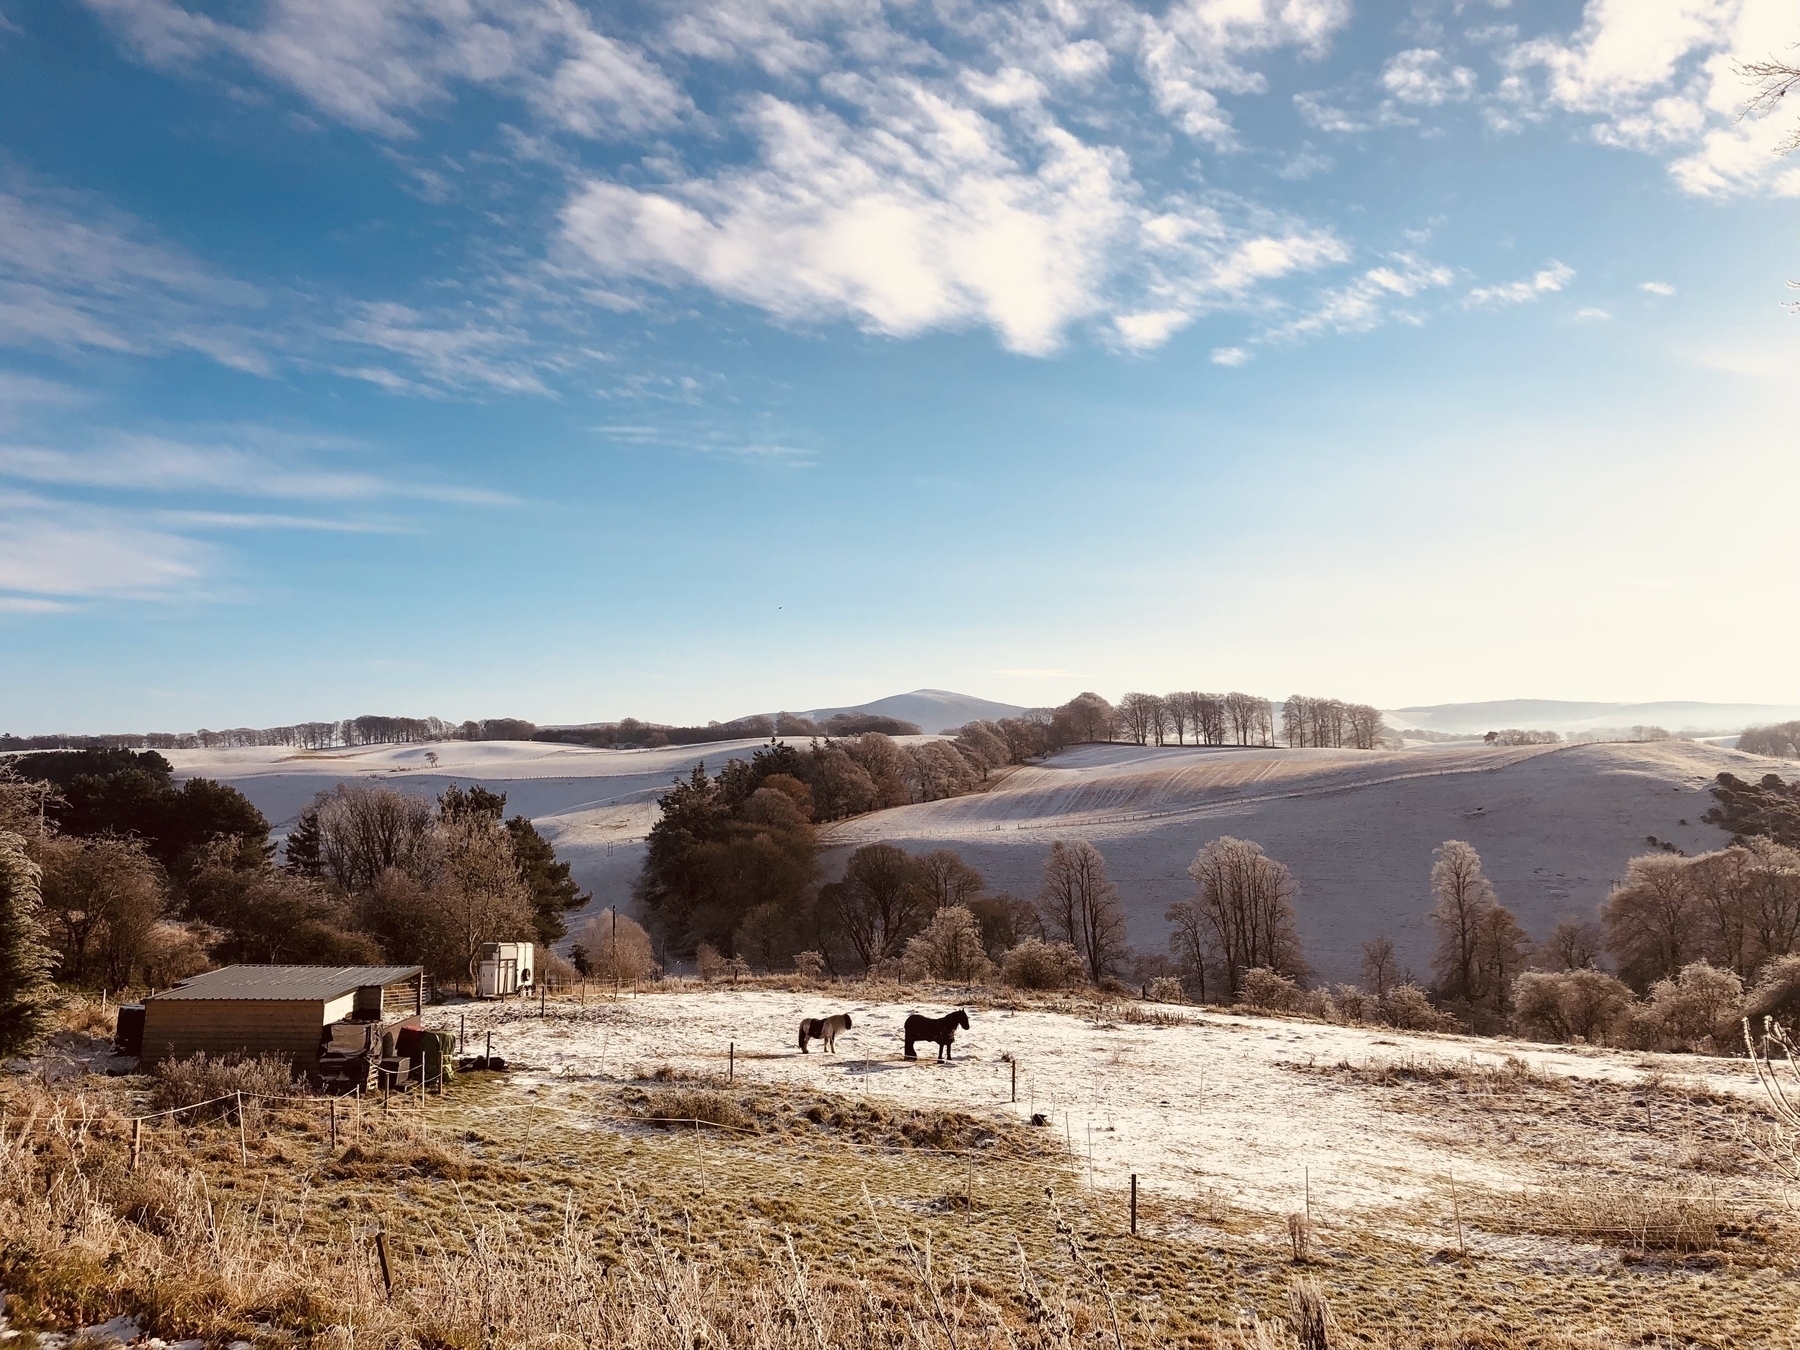 Countryside view of horses in a paddock and rolling white hills of frost with the sun shining in the blue sky